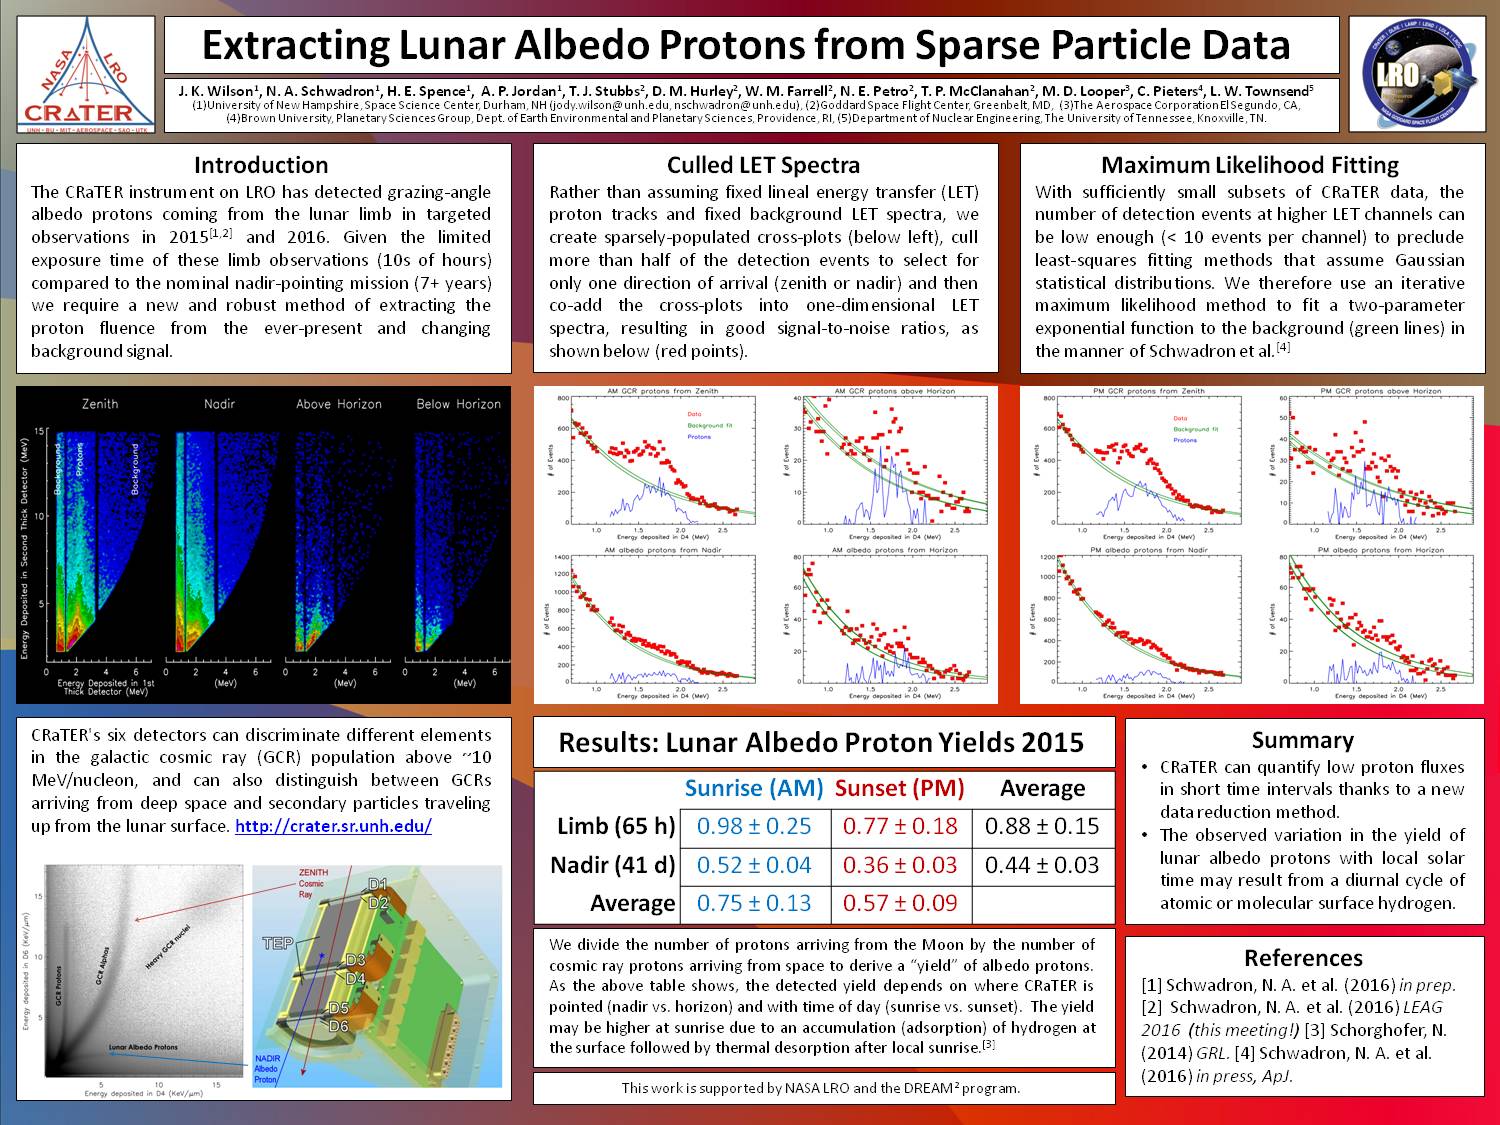 Extracting Lunar Albedo Protons From Sparse Particle Data by jkwilson